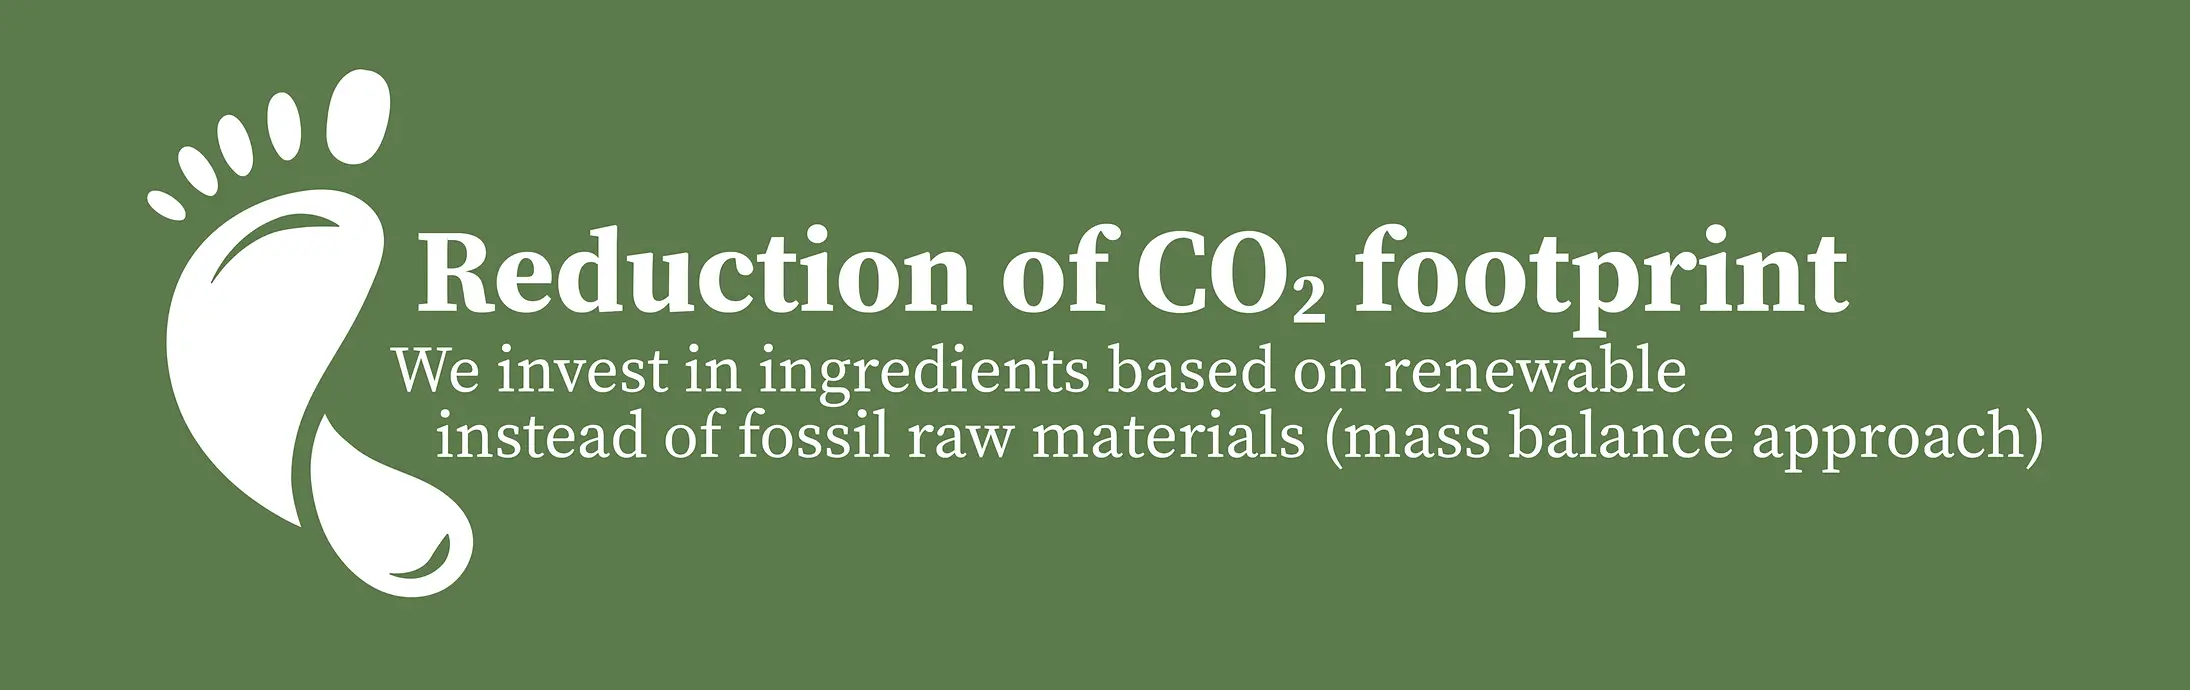 reduction of the co2 foodprint